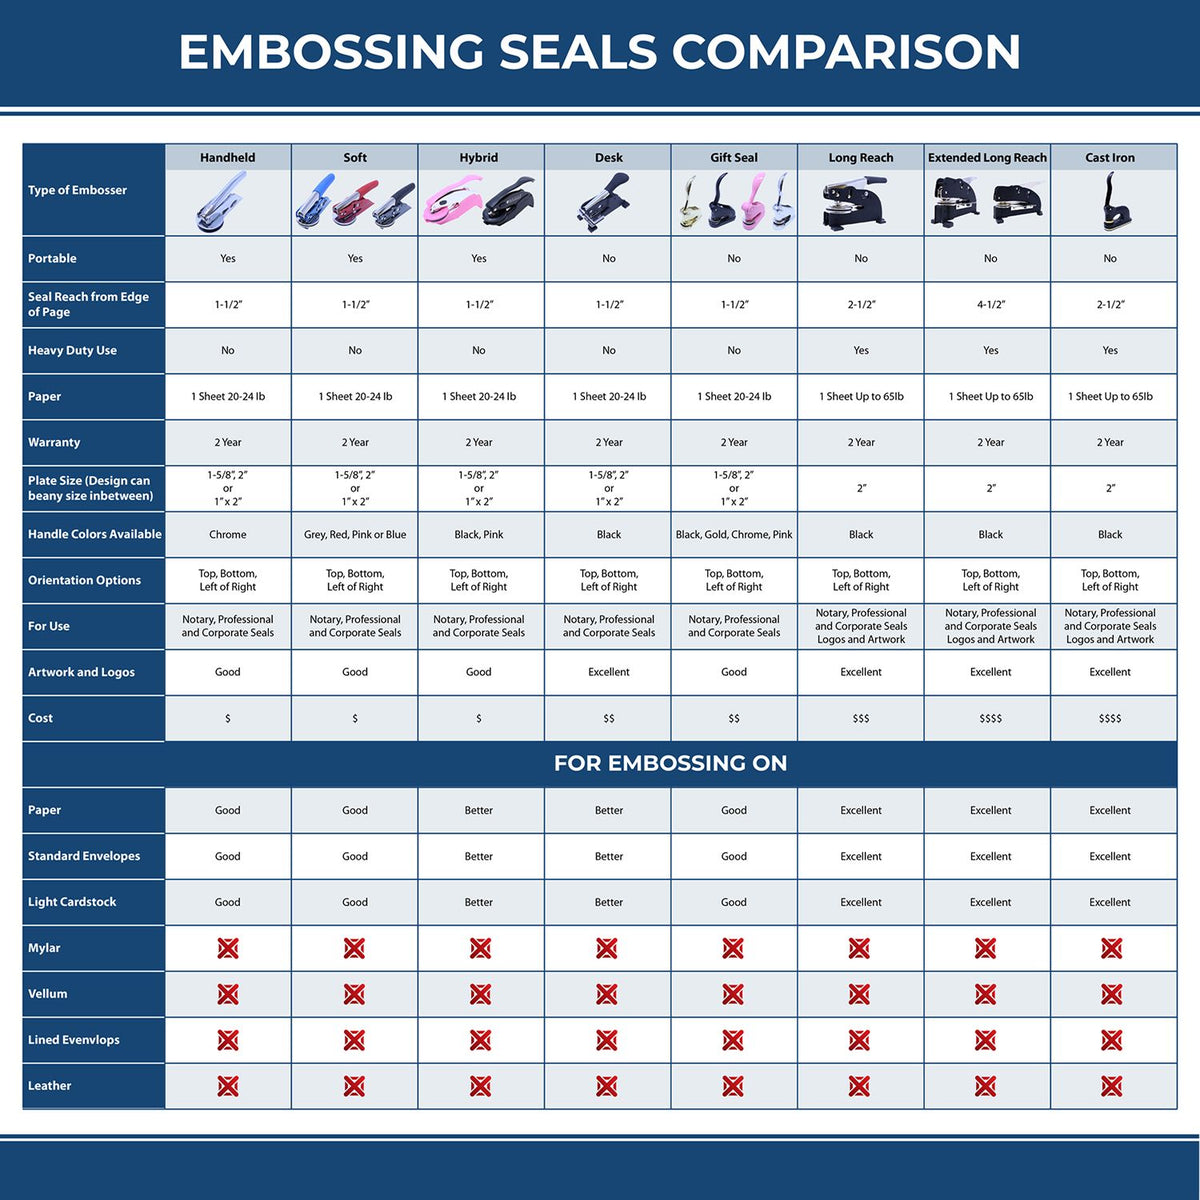 A comparison chart for the different types of mount models available for the Long Reach New York PE Seal.